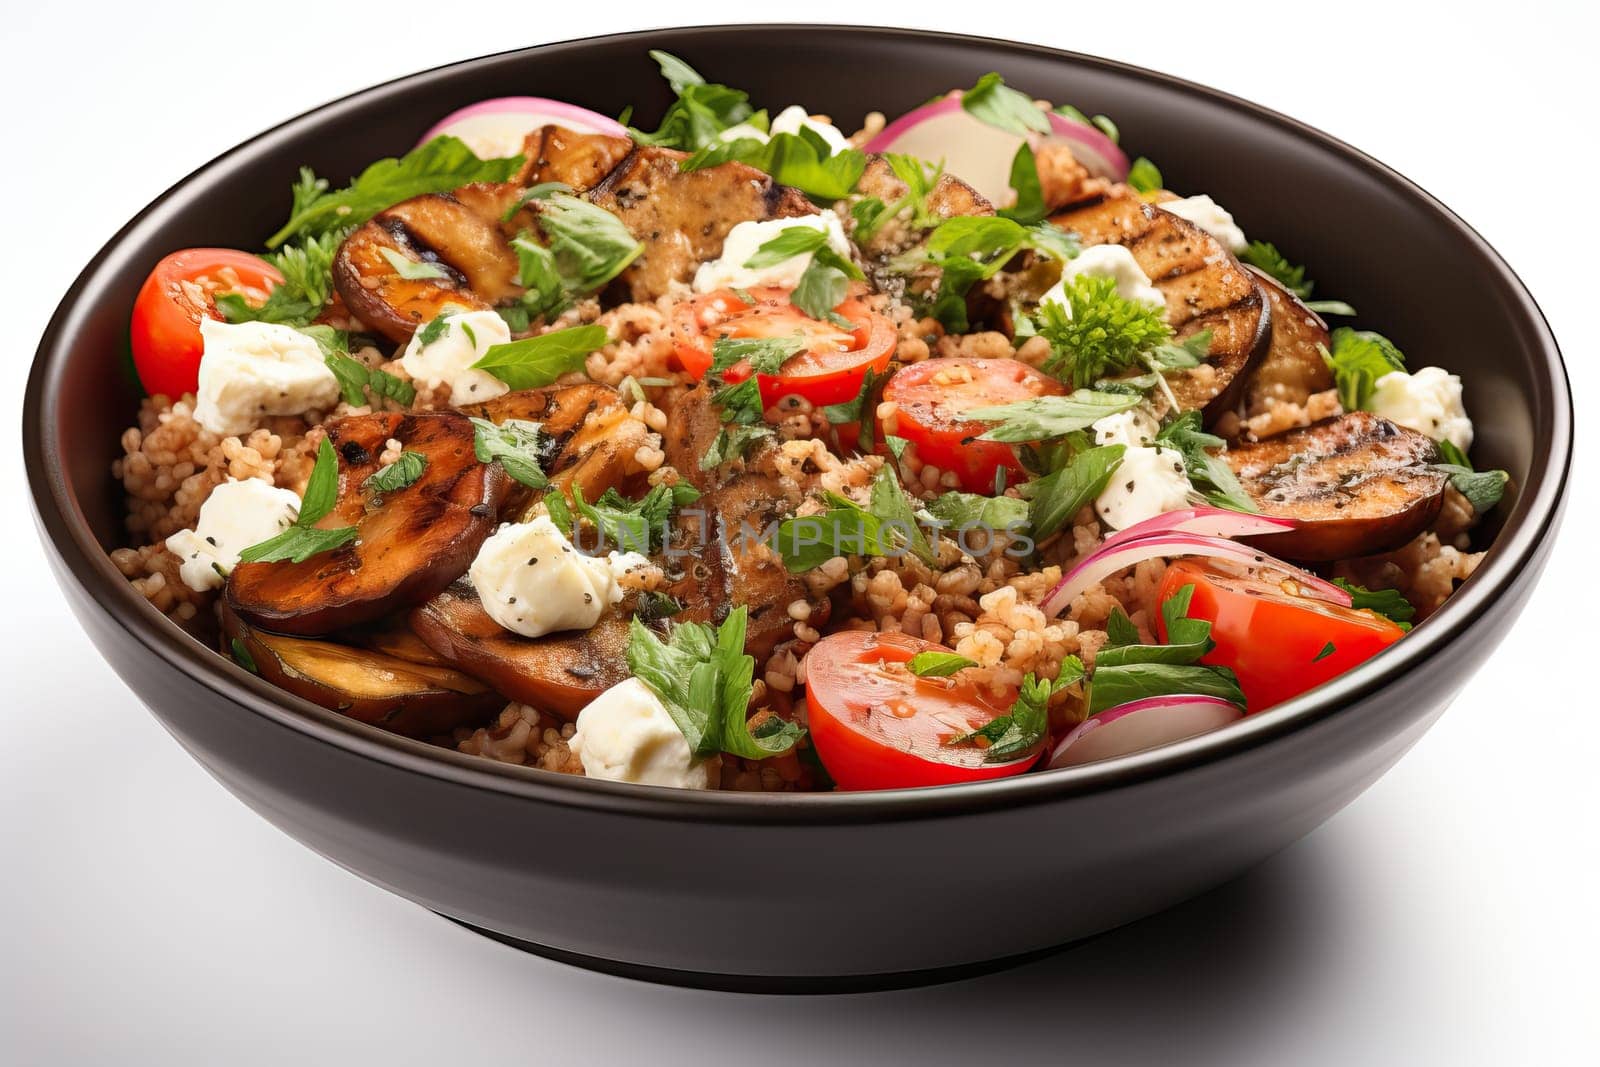 A bowl of buckwheat with a salad of tomatoes, cheese and purple onions, a dish for weight loss.